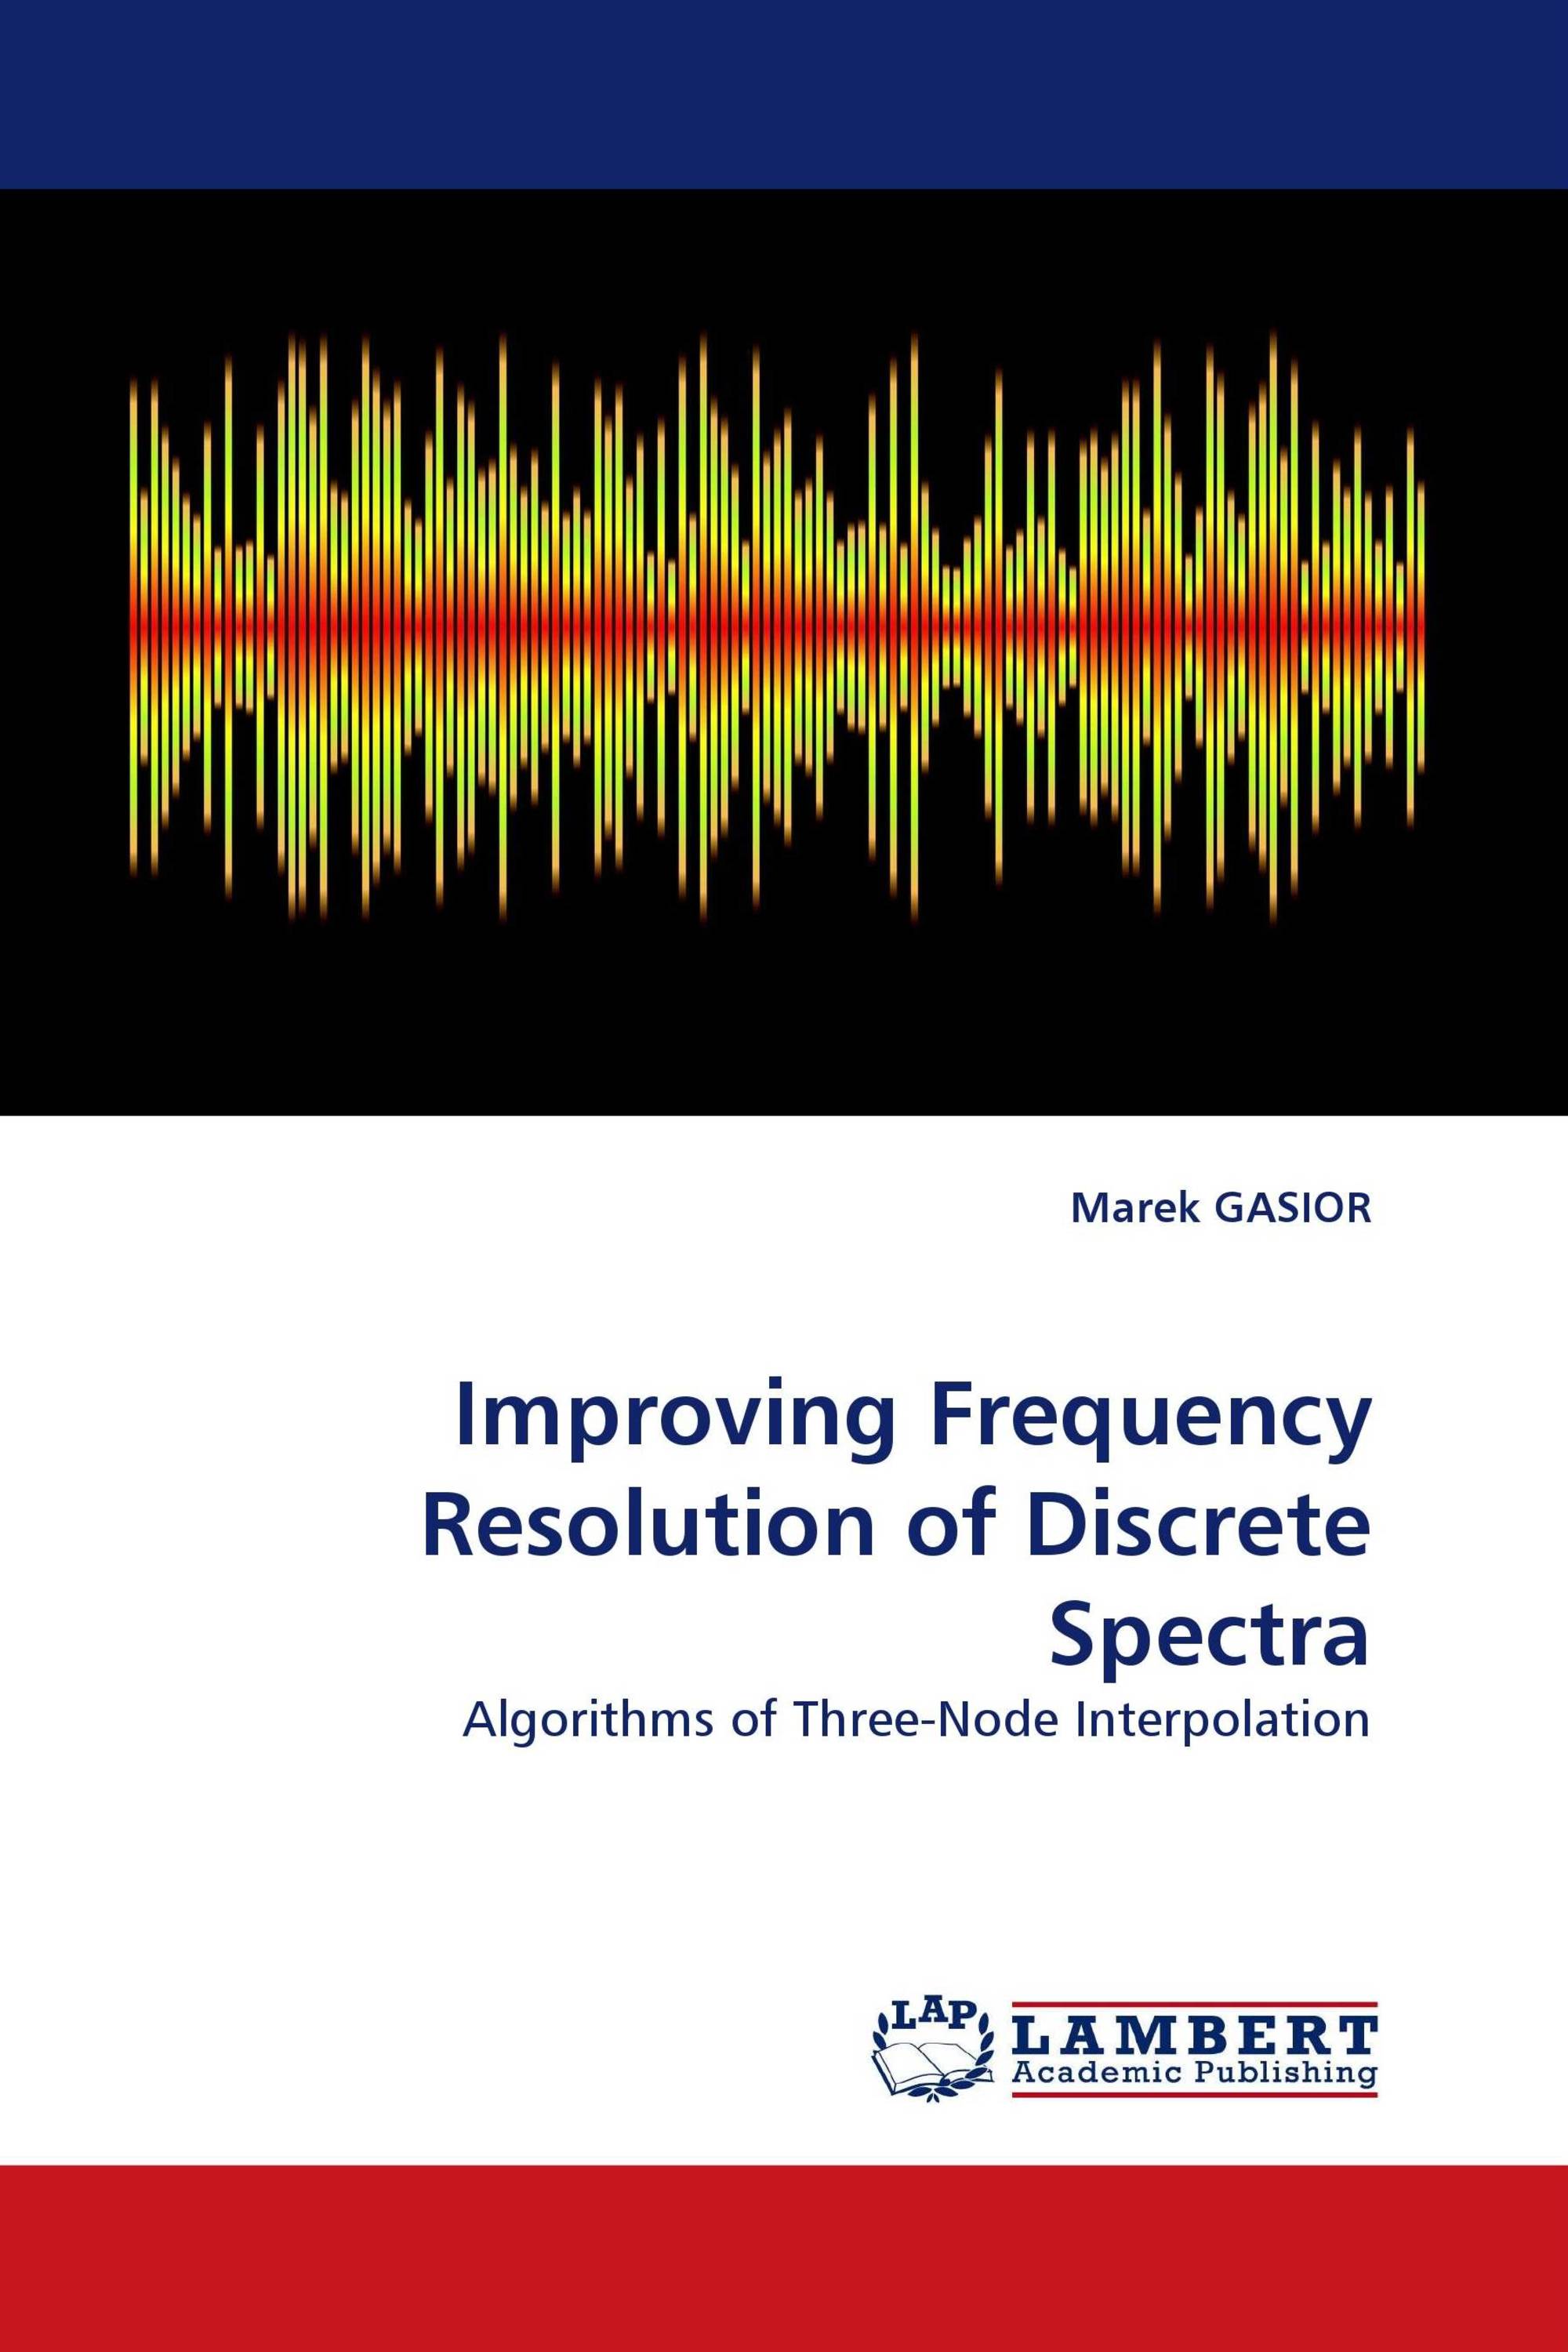 Improving Frequency Resolution of Discrete Spectra